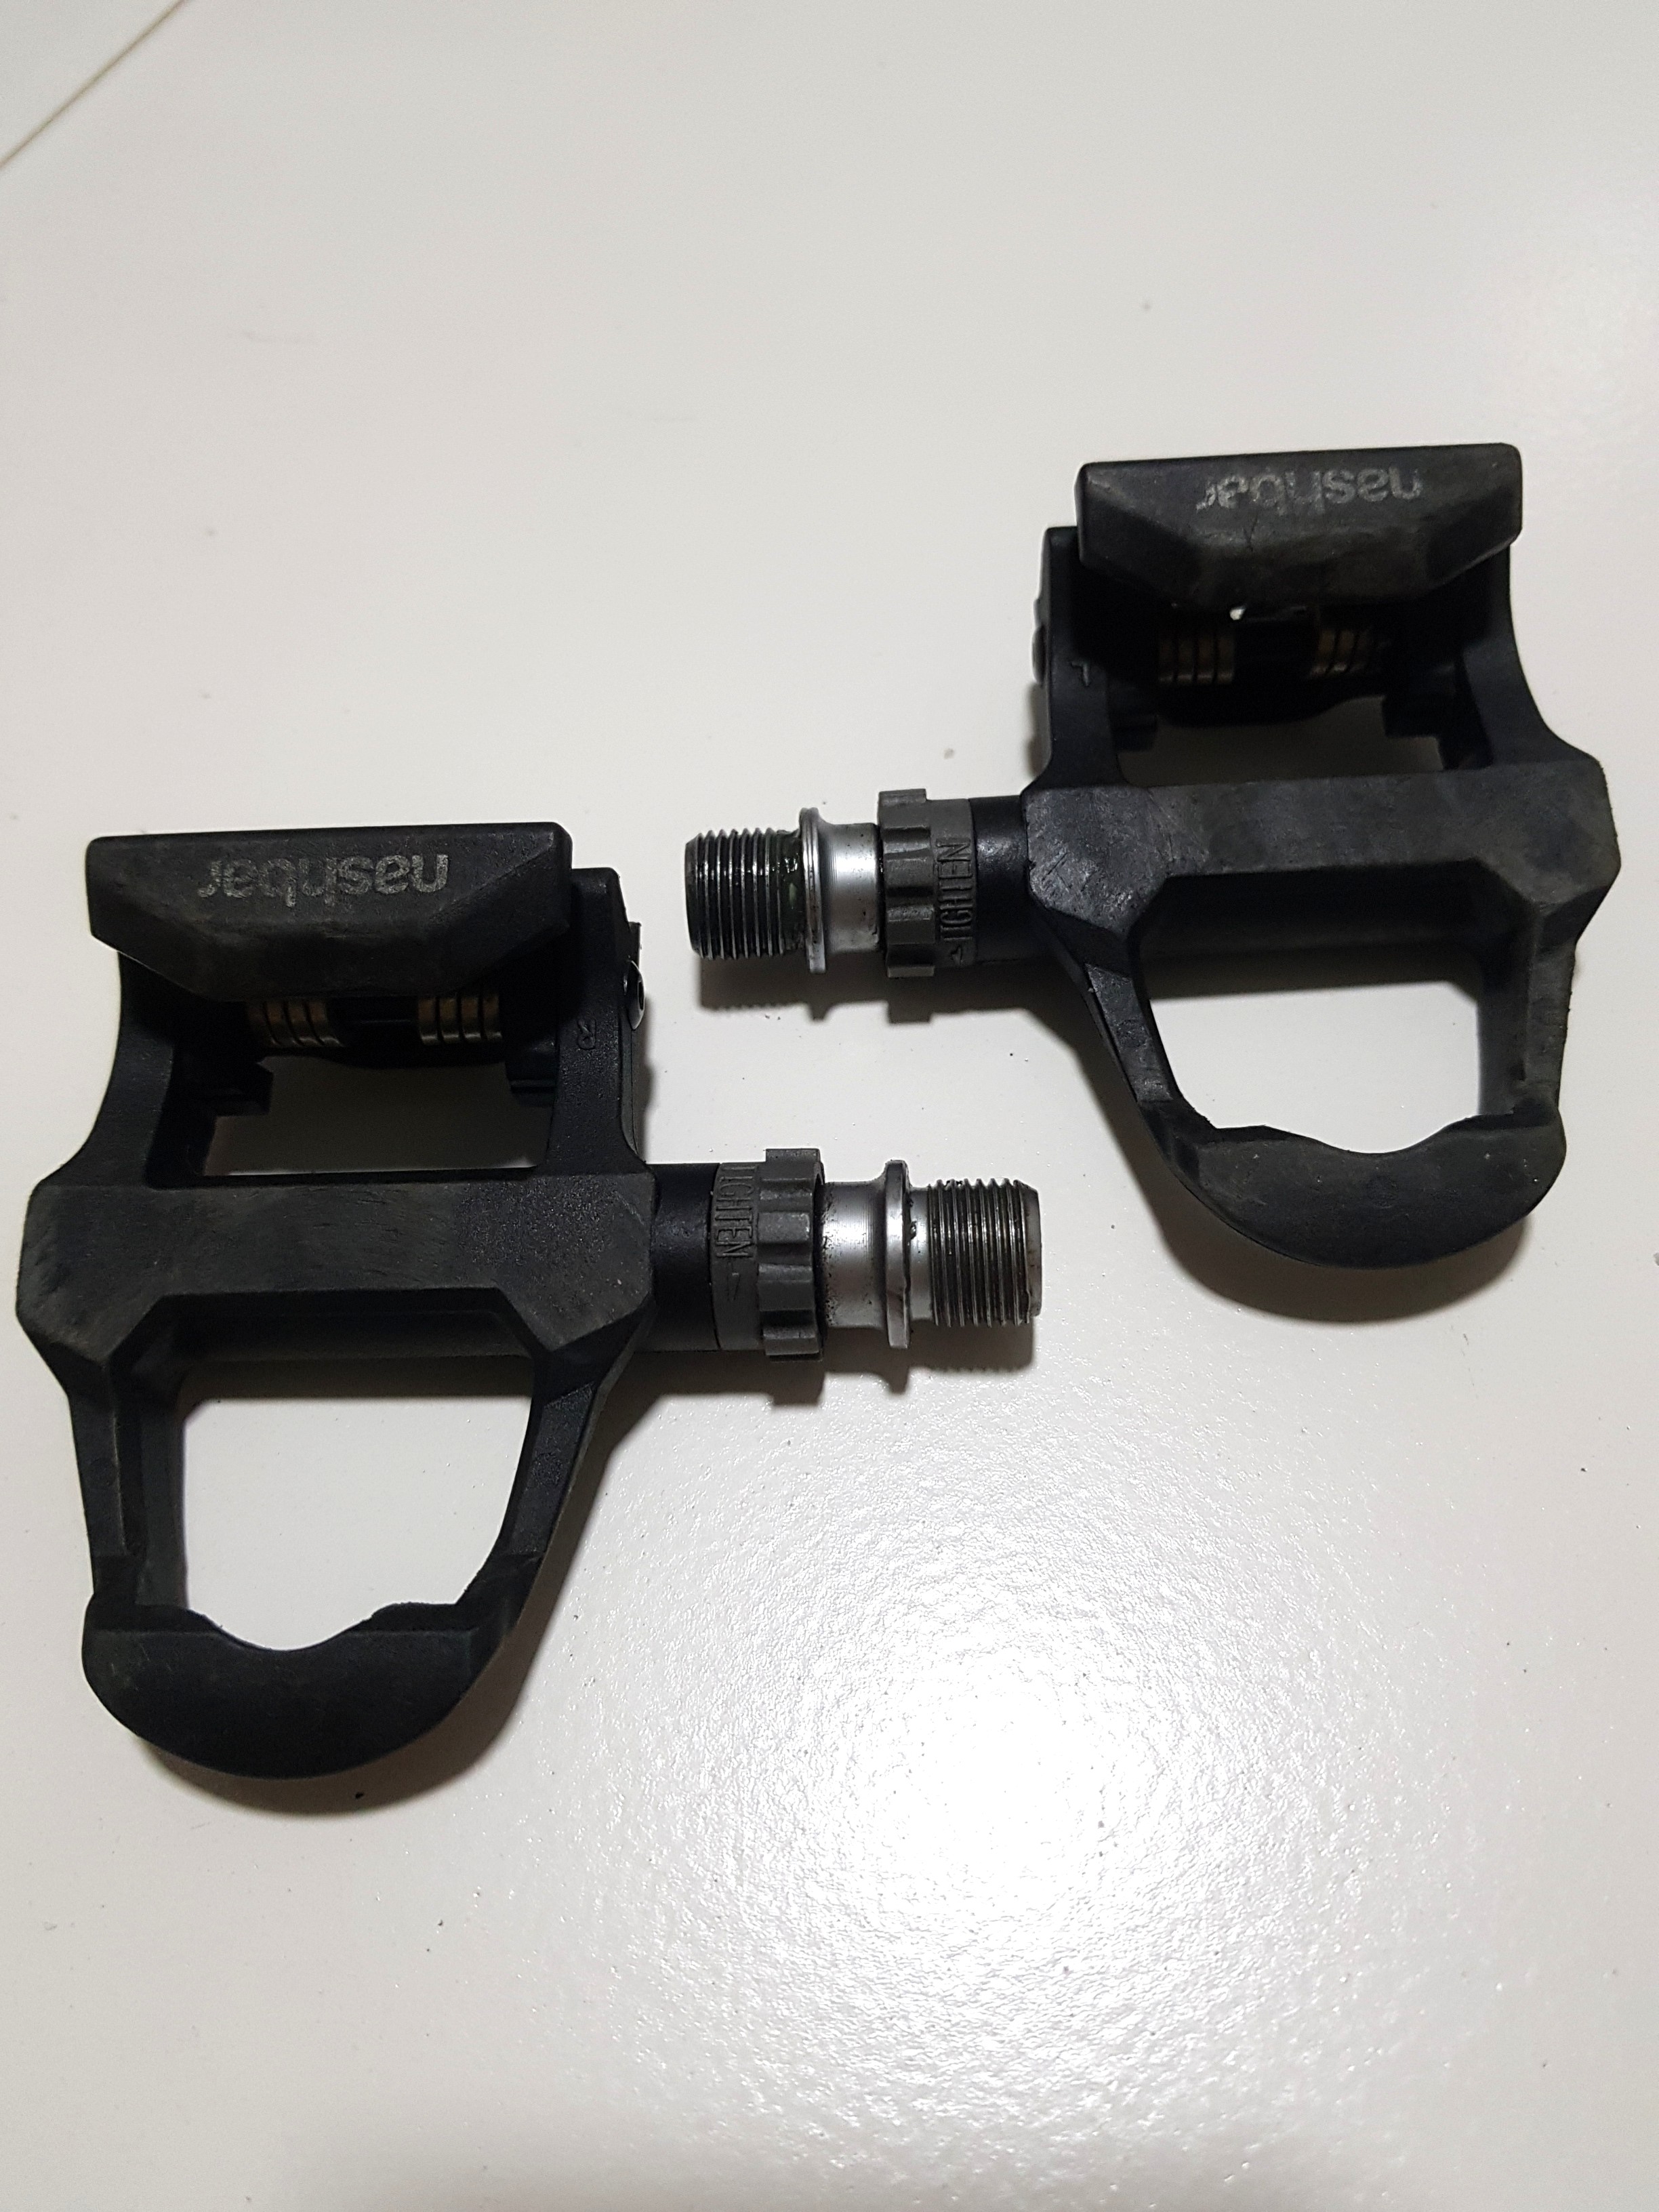 Nashbar clipless pedals, Bicycles 